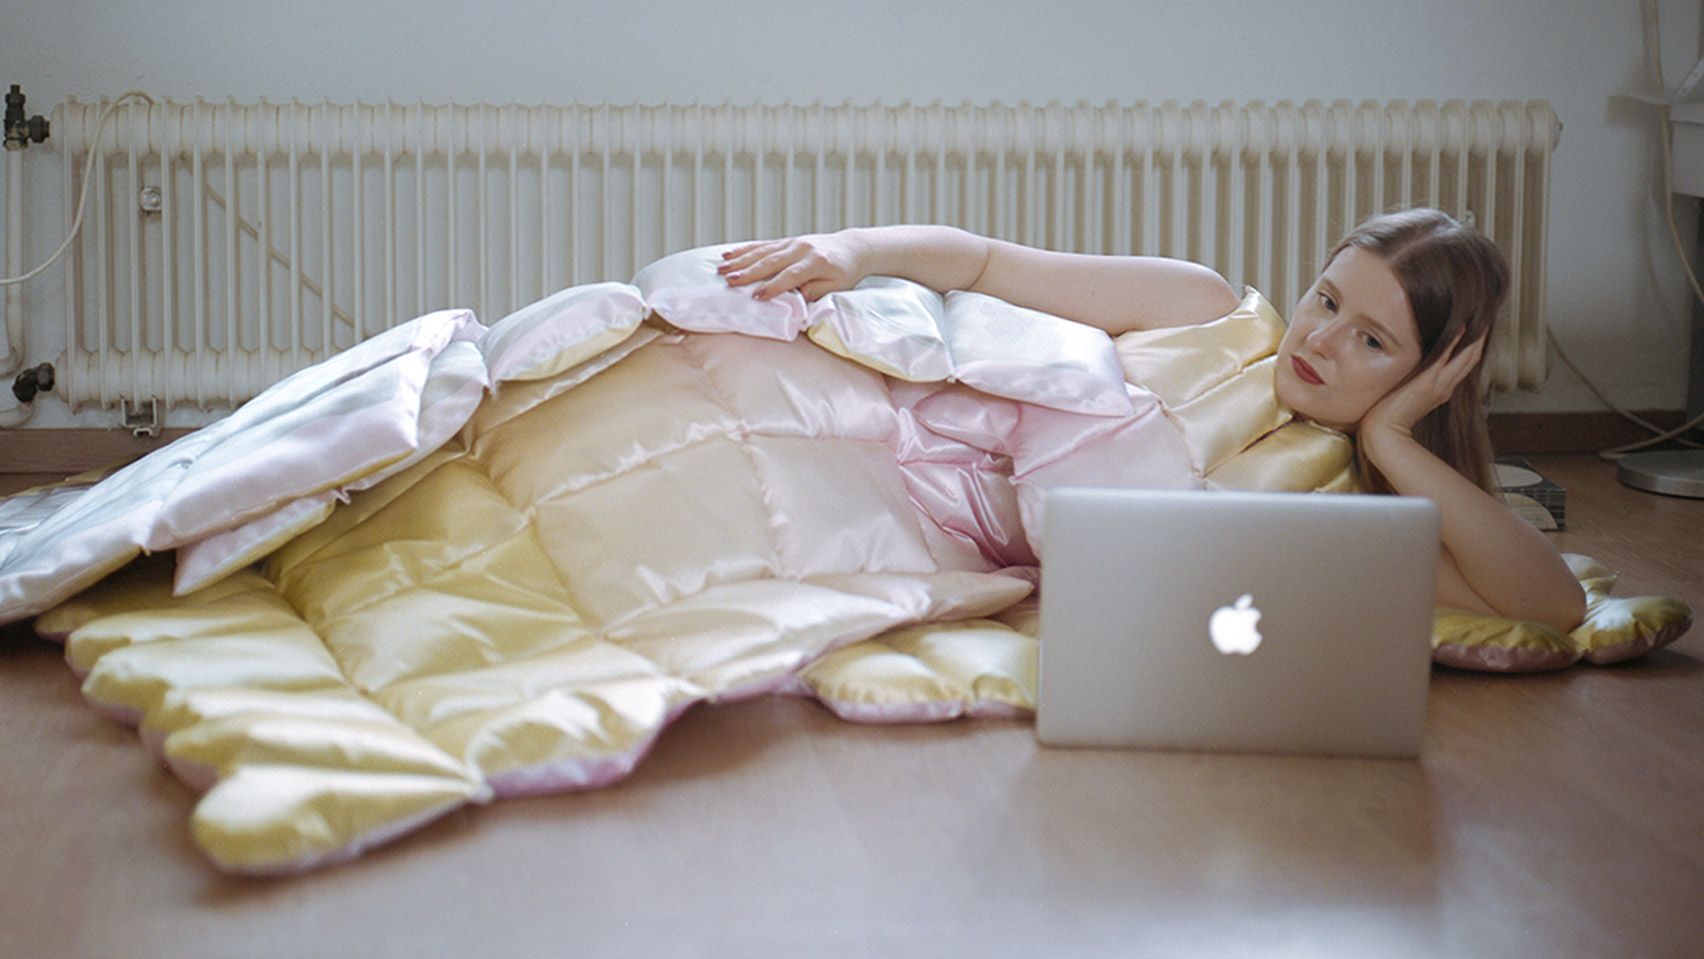 Duvet-inspired collection for times of isolation